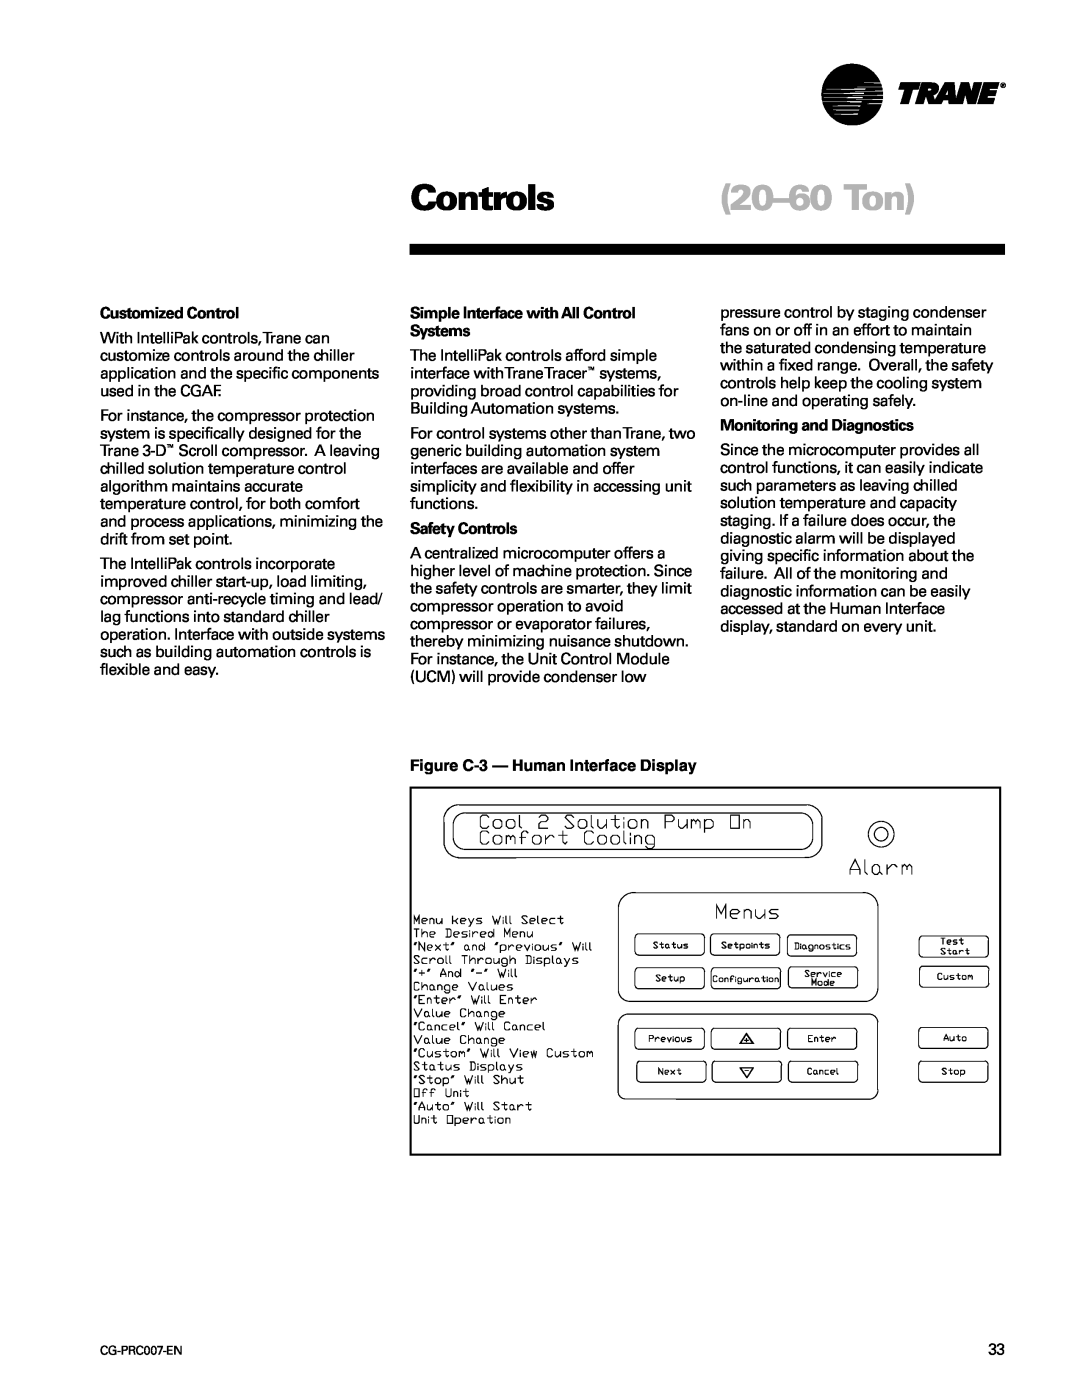 Trane CG-PRC007-EN manual 20-60Ton, Customized Control, Simple Interface with All Control Systems, Safety Controls 